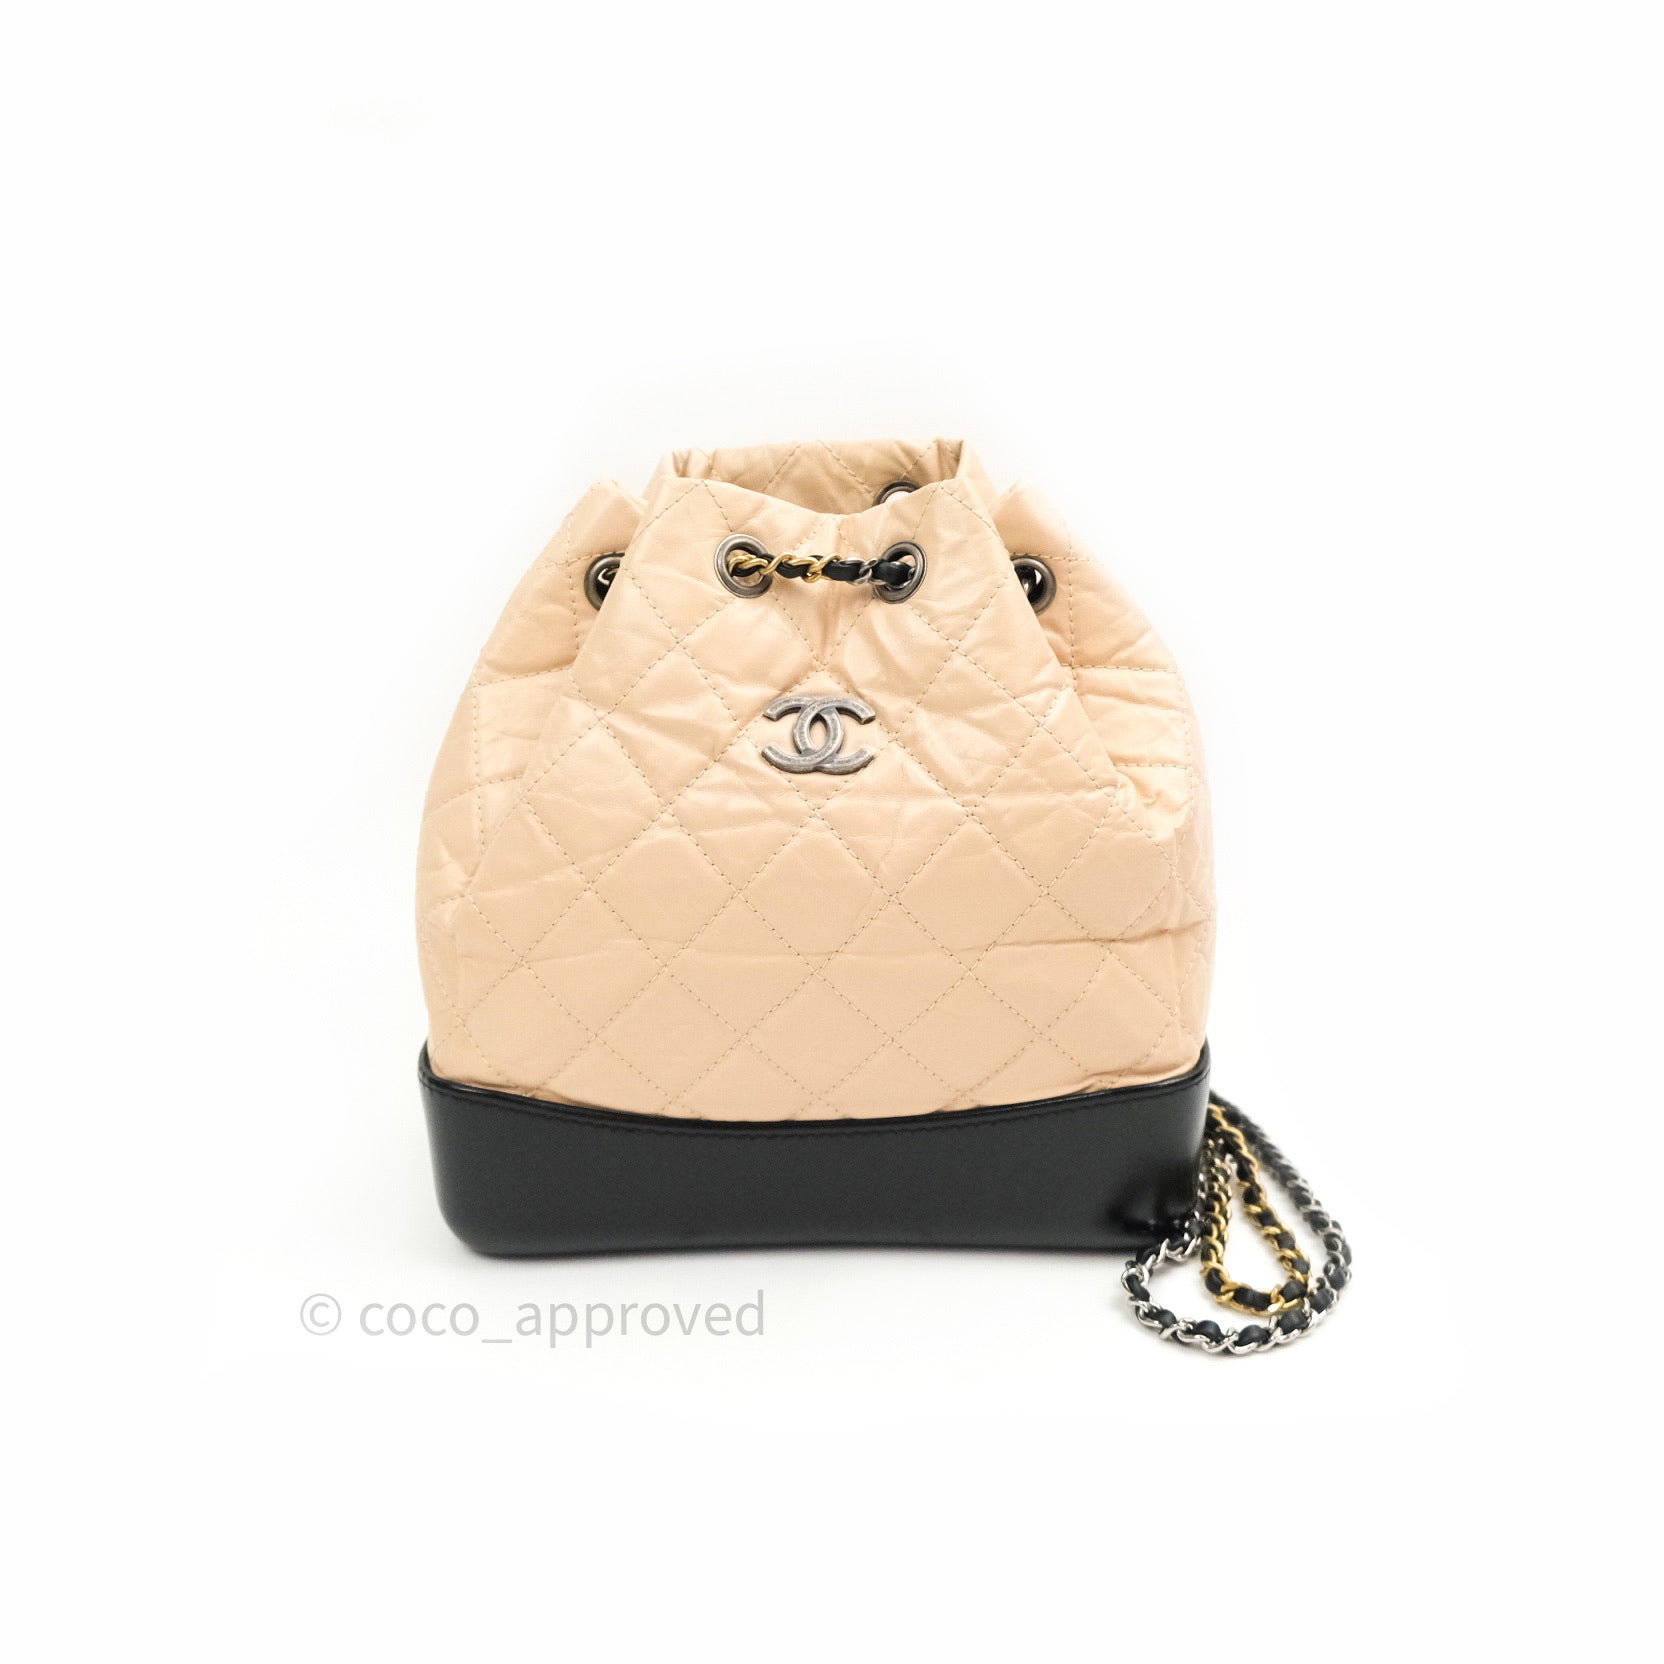 Foxy Couture - Our Black and Beige Chanel Gabrielle Bag